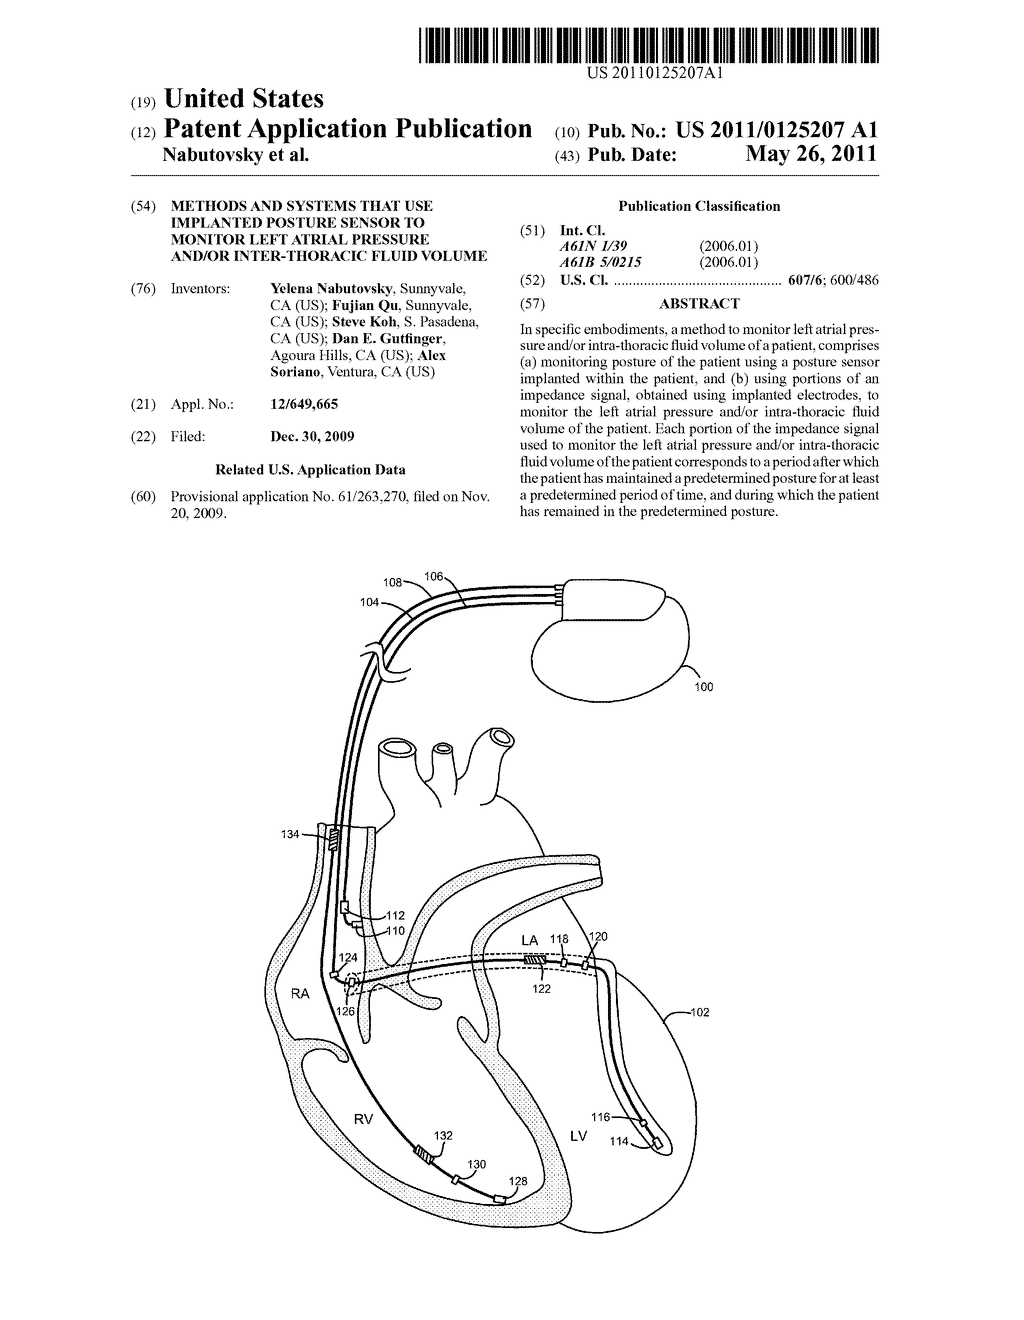 METHODS AND SYSTEMS THAT USE IMPLANTED POSTURE SENSOR TO MONITOR LEFT ATRIAL PRESSURE AND/OR INTER-THORACIC FLUID VOLUME - diagram, schematic, and image 01